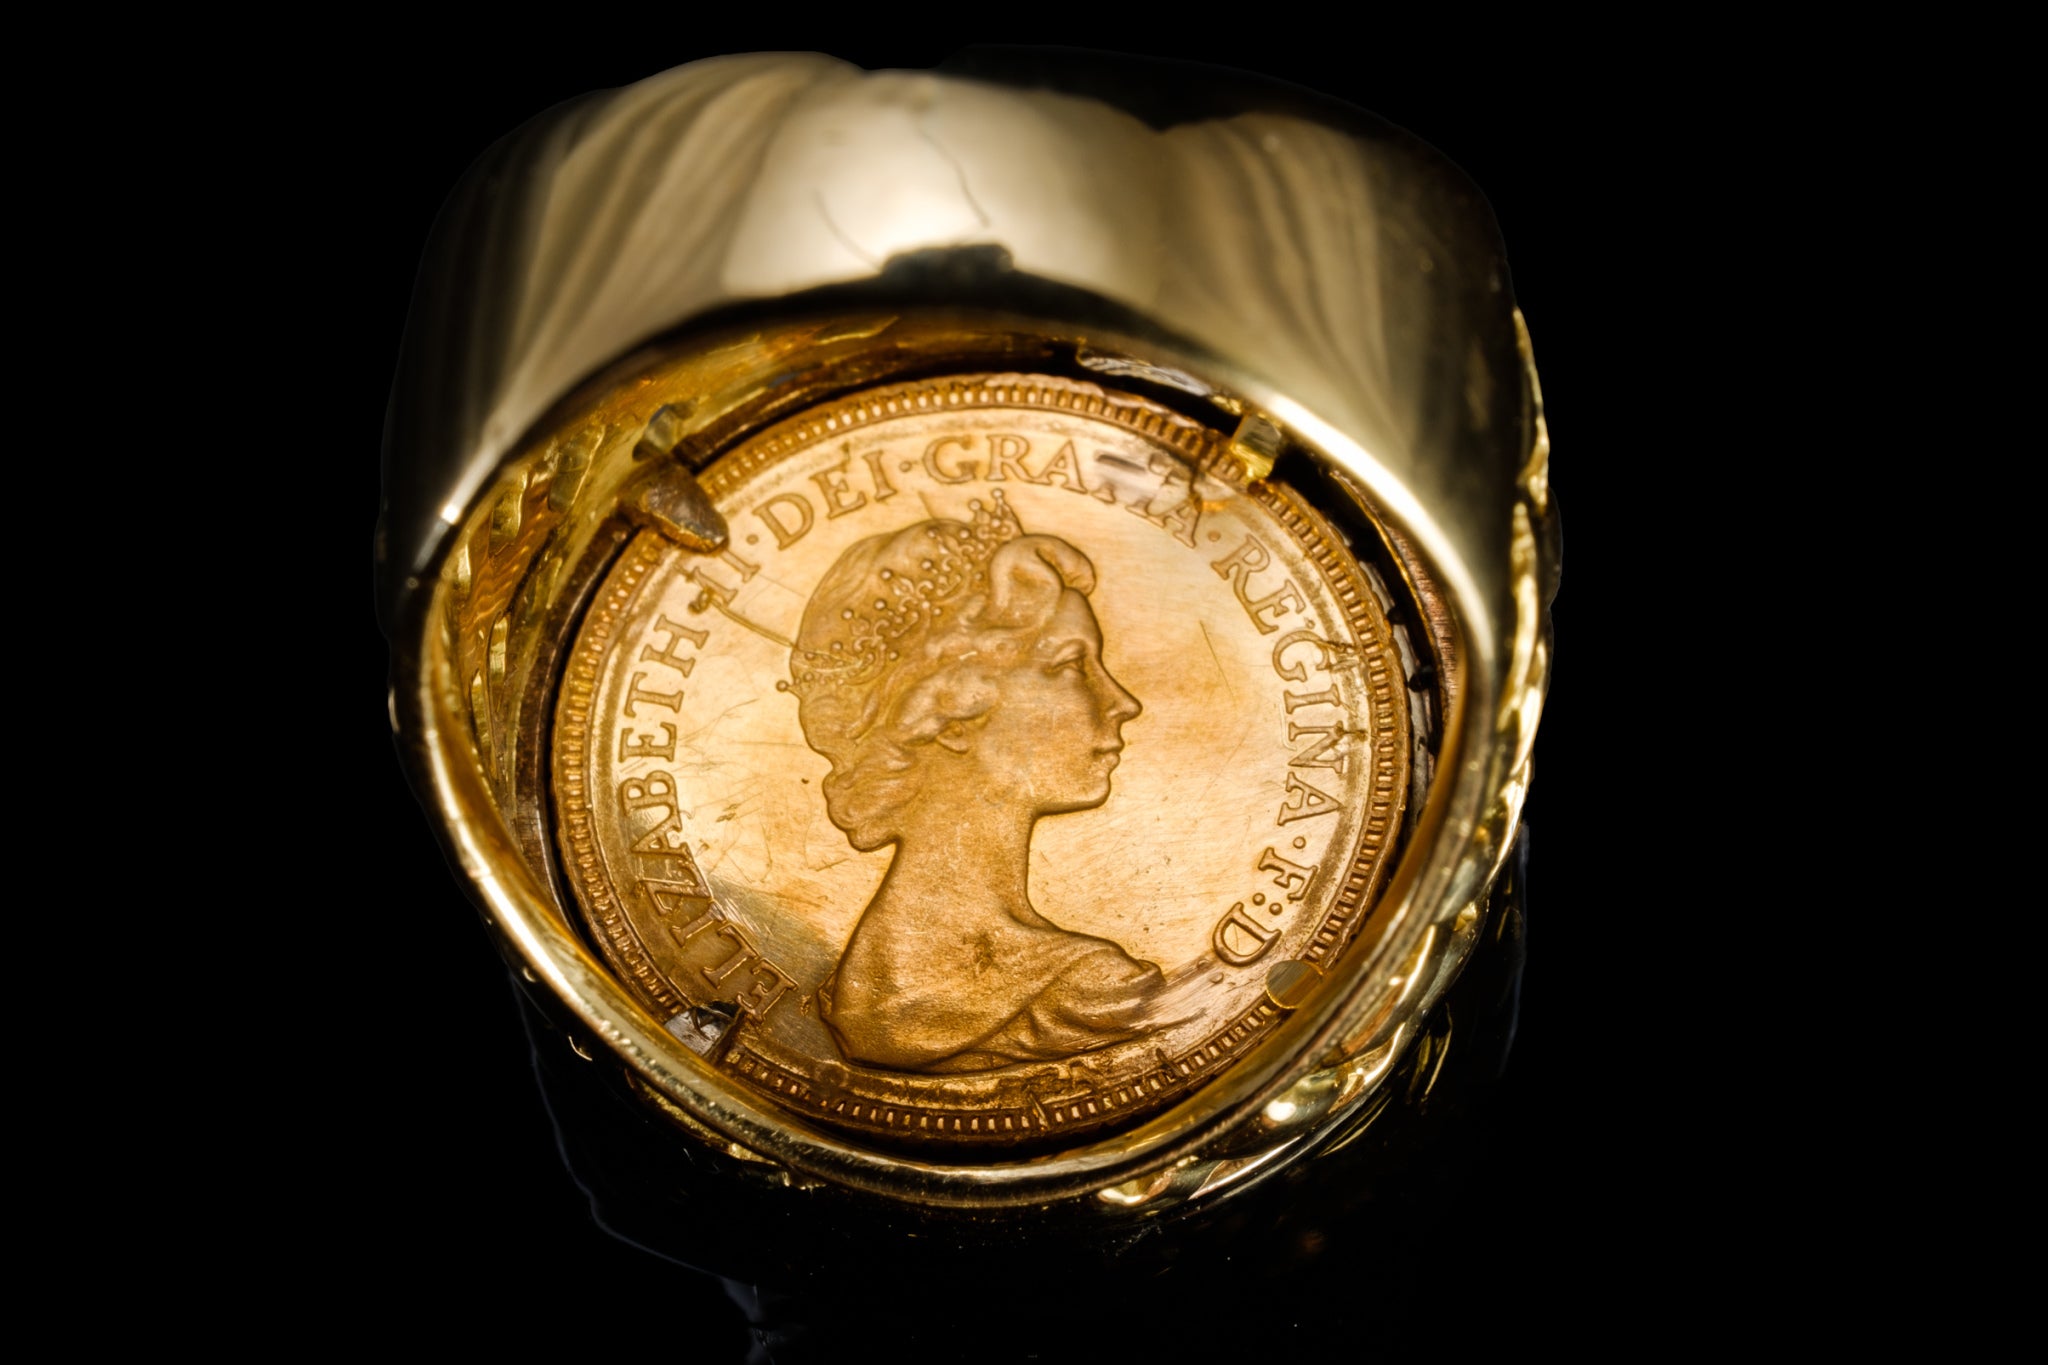 18ct Gold and Diamond Half Sovereign Ring.